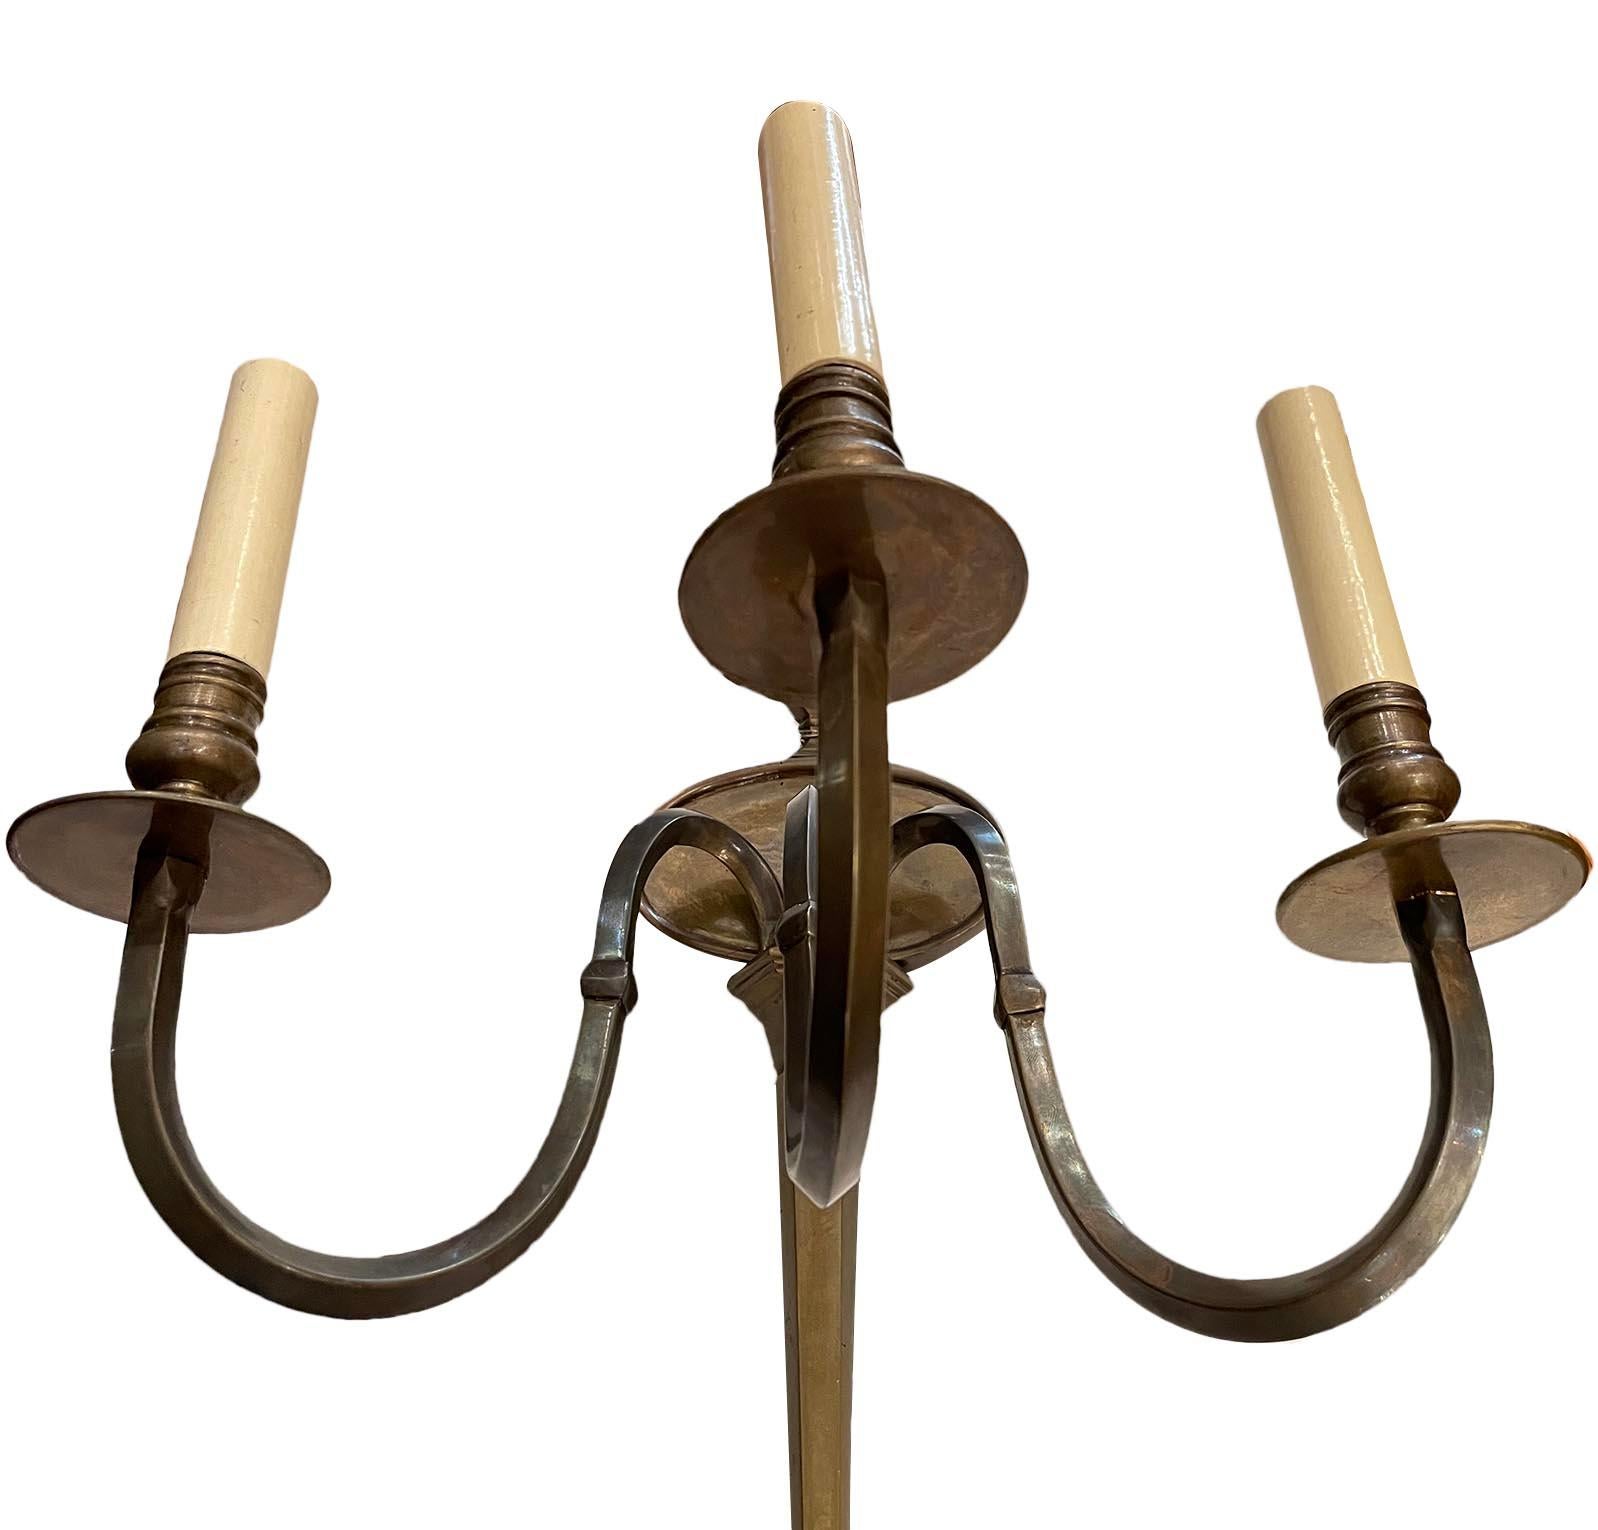 A set of four circa 1930s English neoclassic style patinated bronze lights sconces. Sold per pair.

Measurements:
Height 15